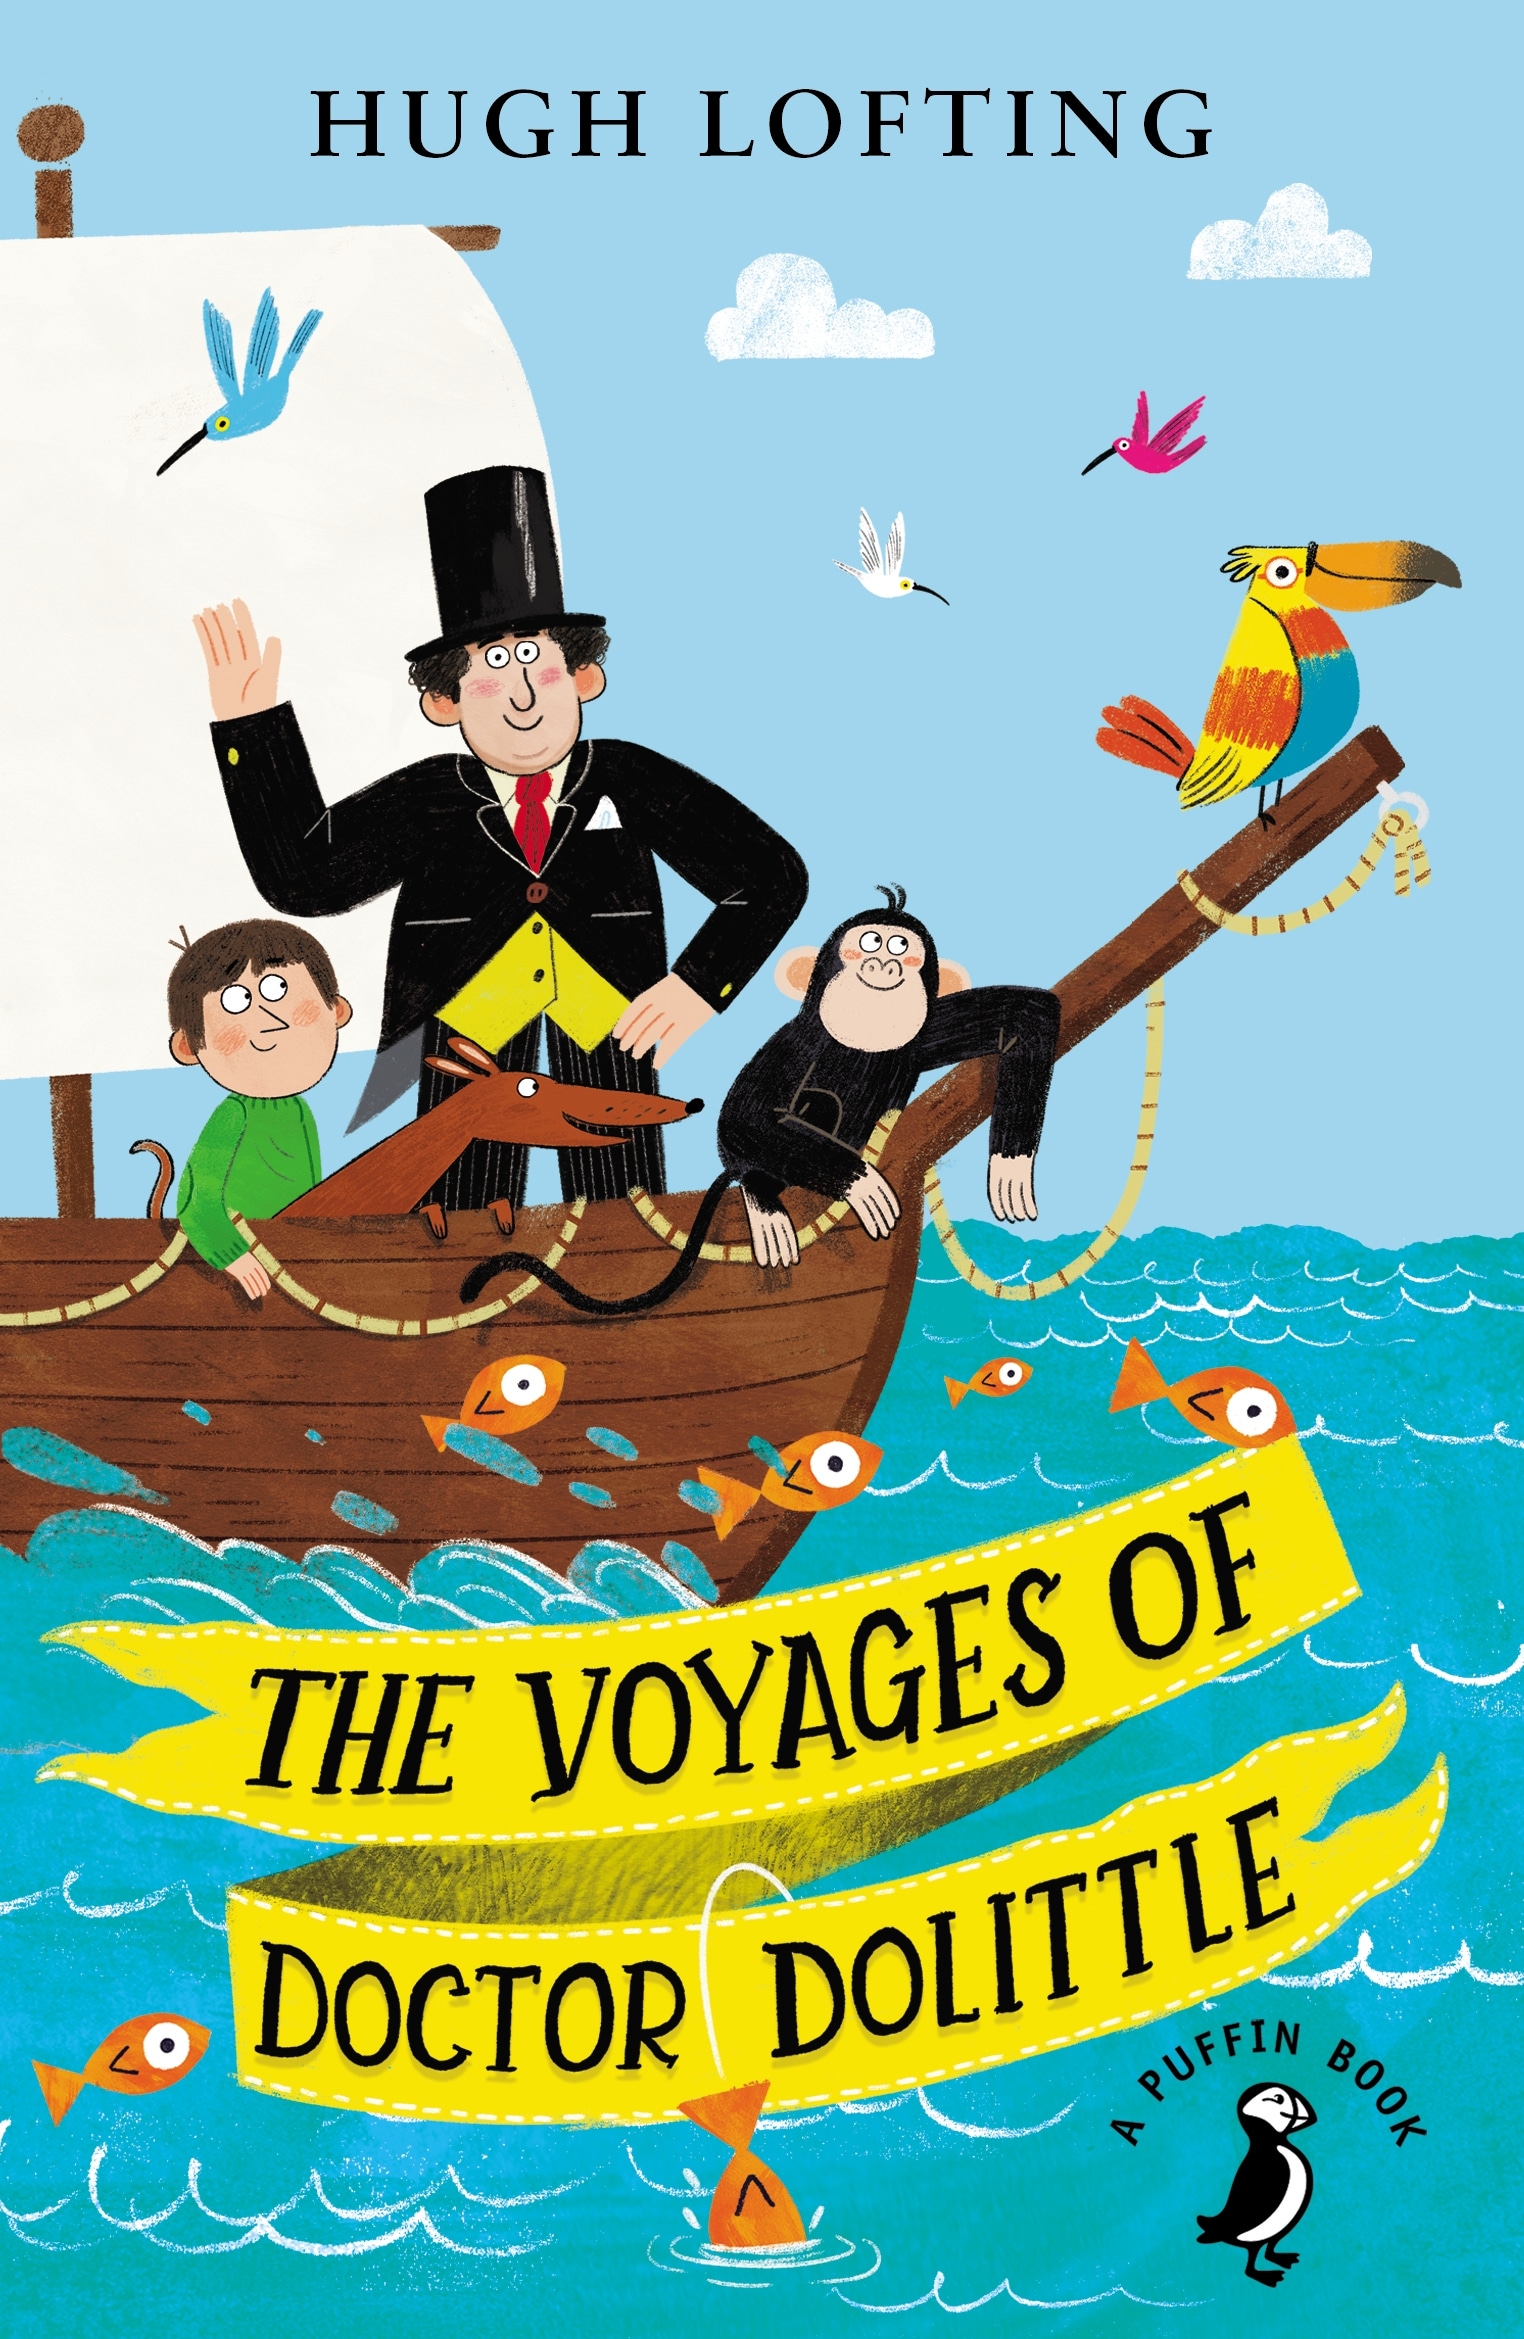 Book “The Voyages of Doctor Dolittle” by Hugh Lofting — February 13, 2020